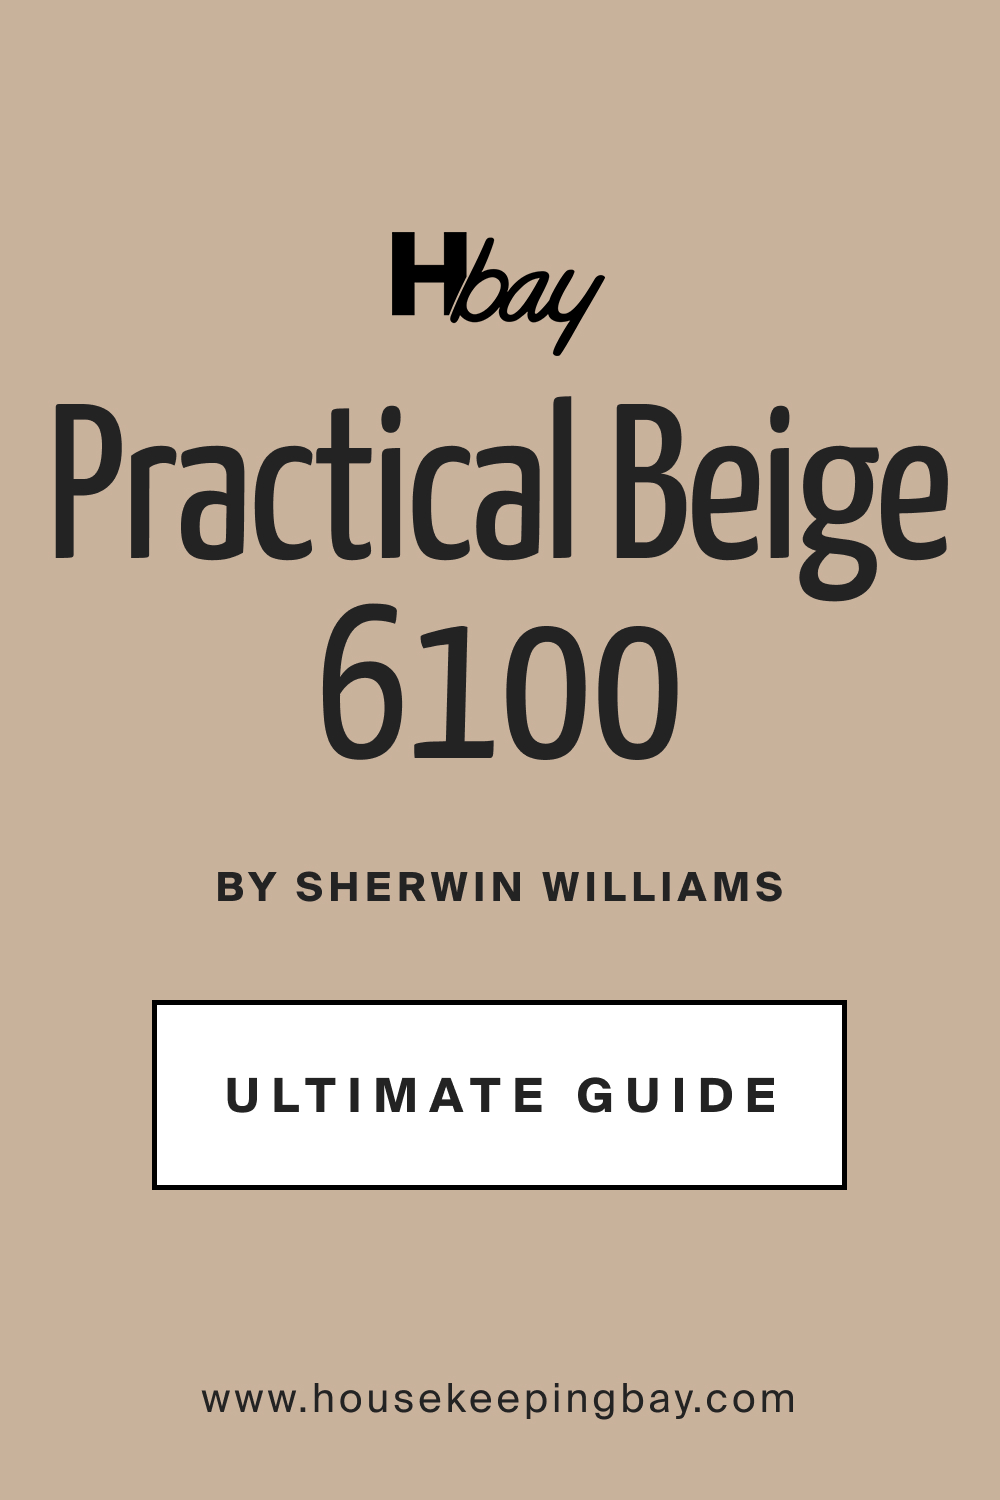 SW Practical Beige 6100 by Sherwin Williams Ultimate Guide